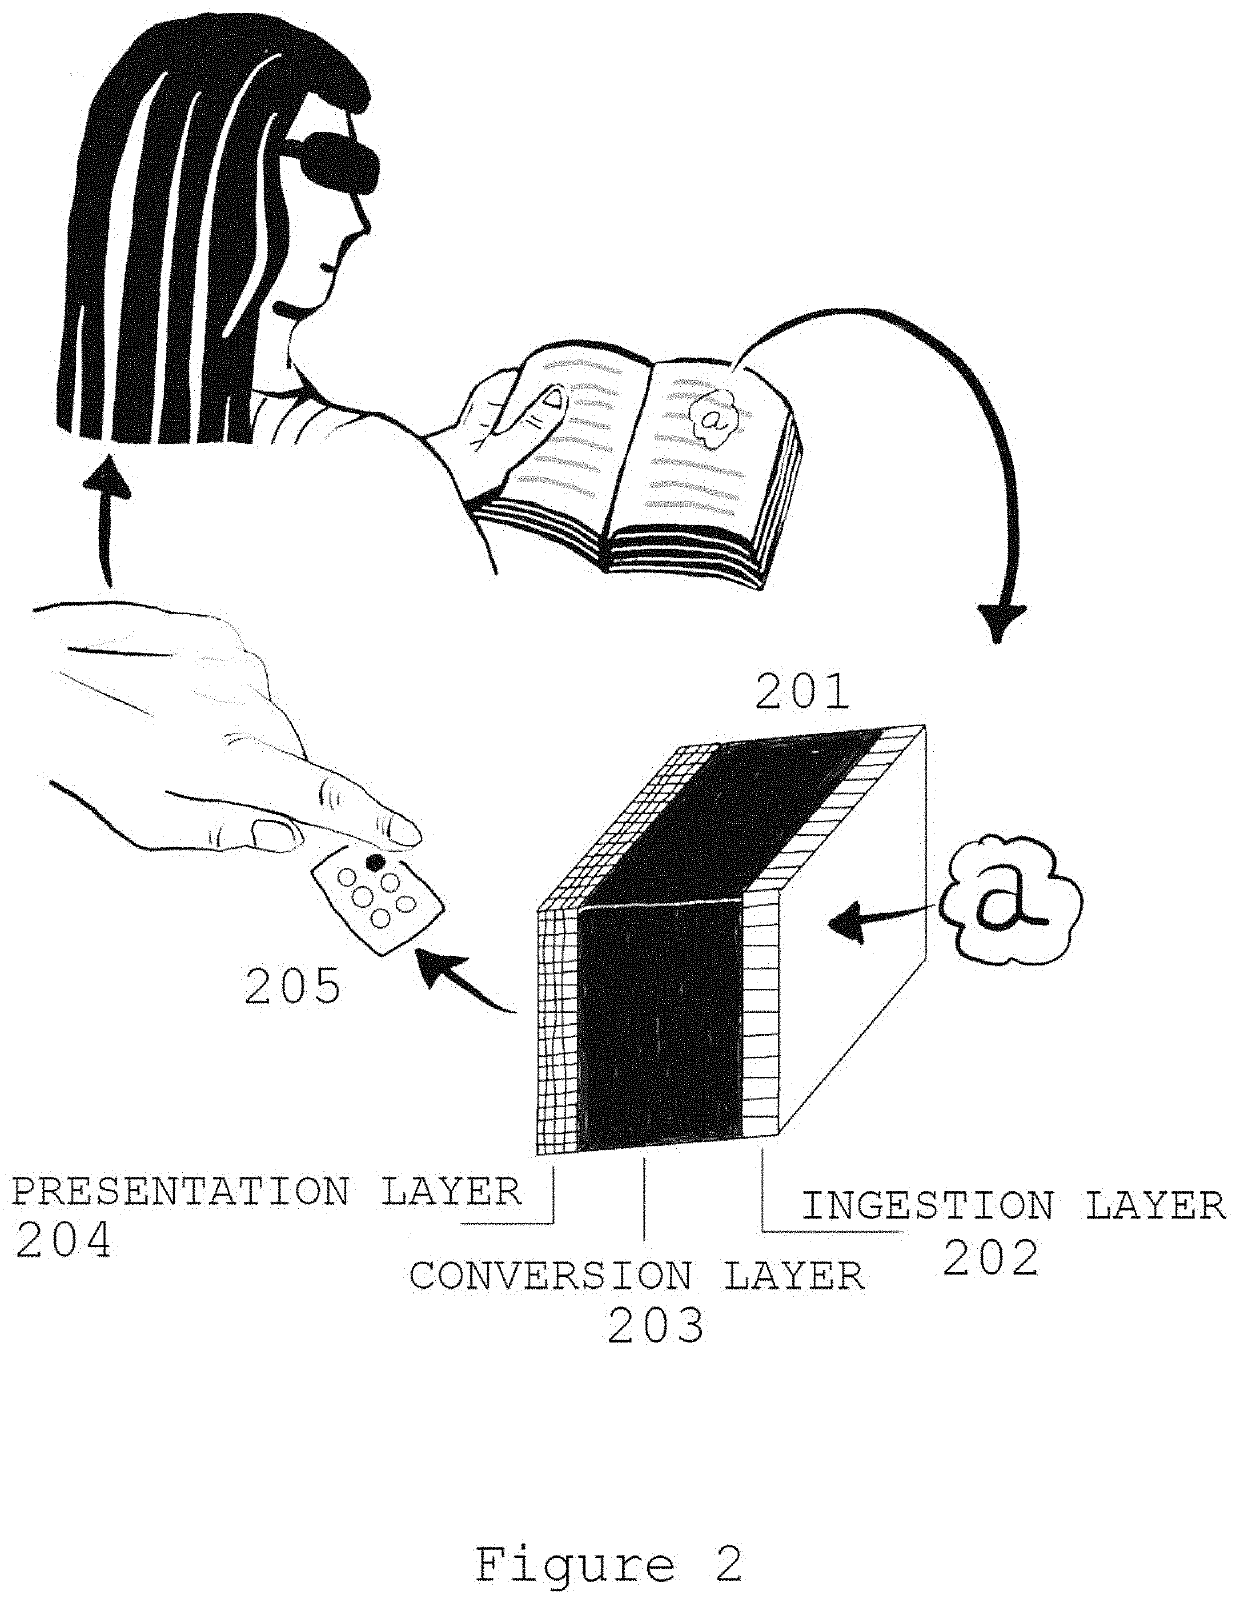 Portable Reading, Multi-sensory Scan and Vehicle-generated Motion Input